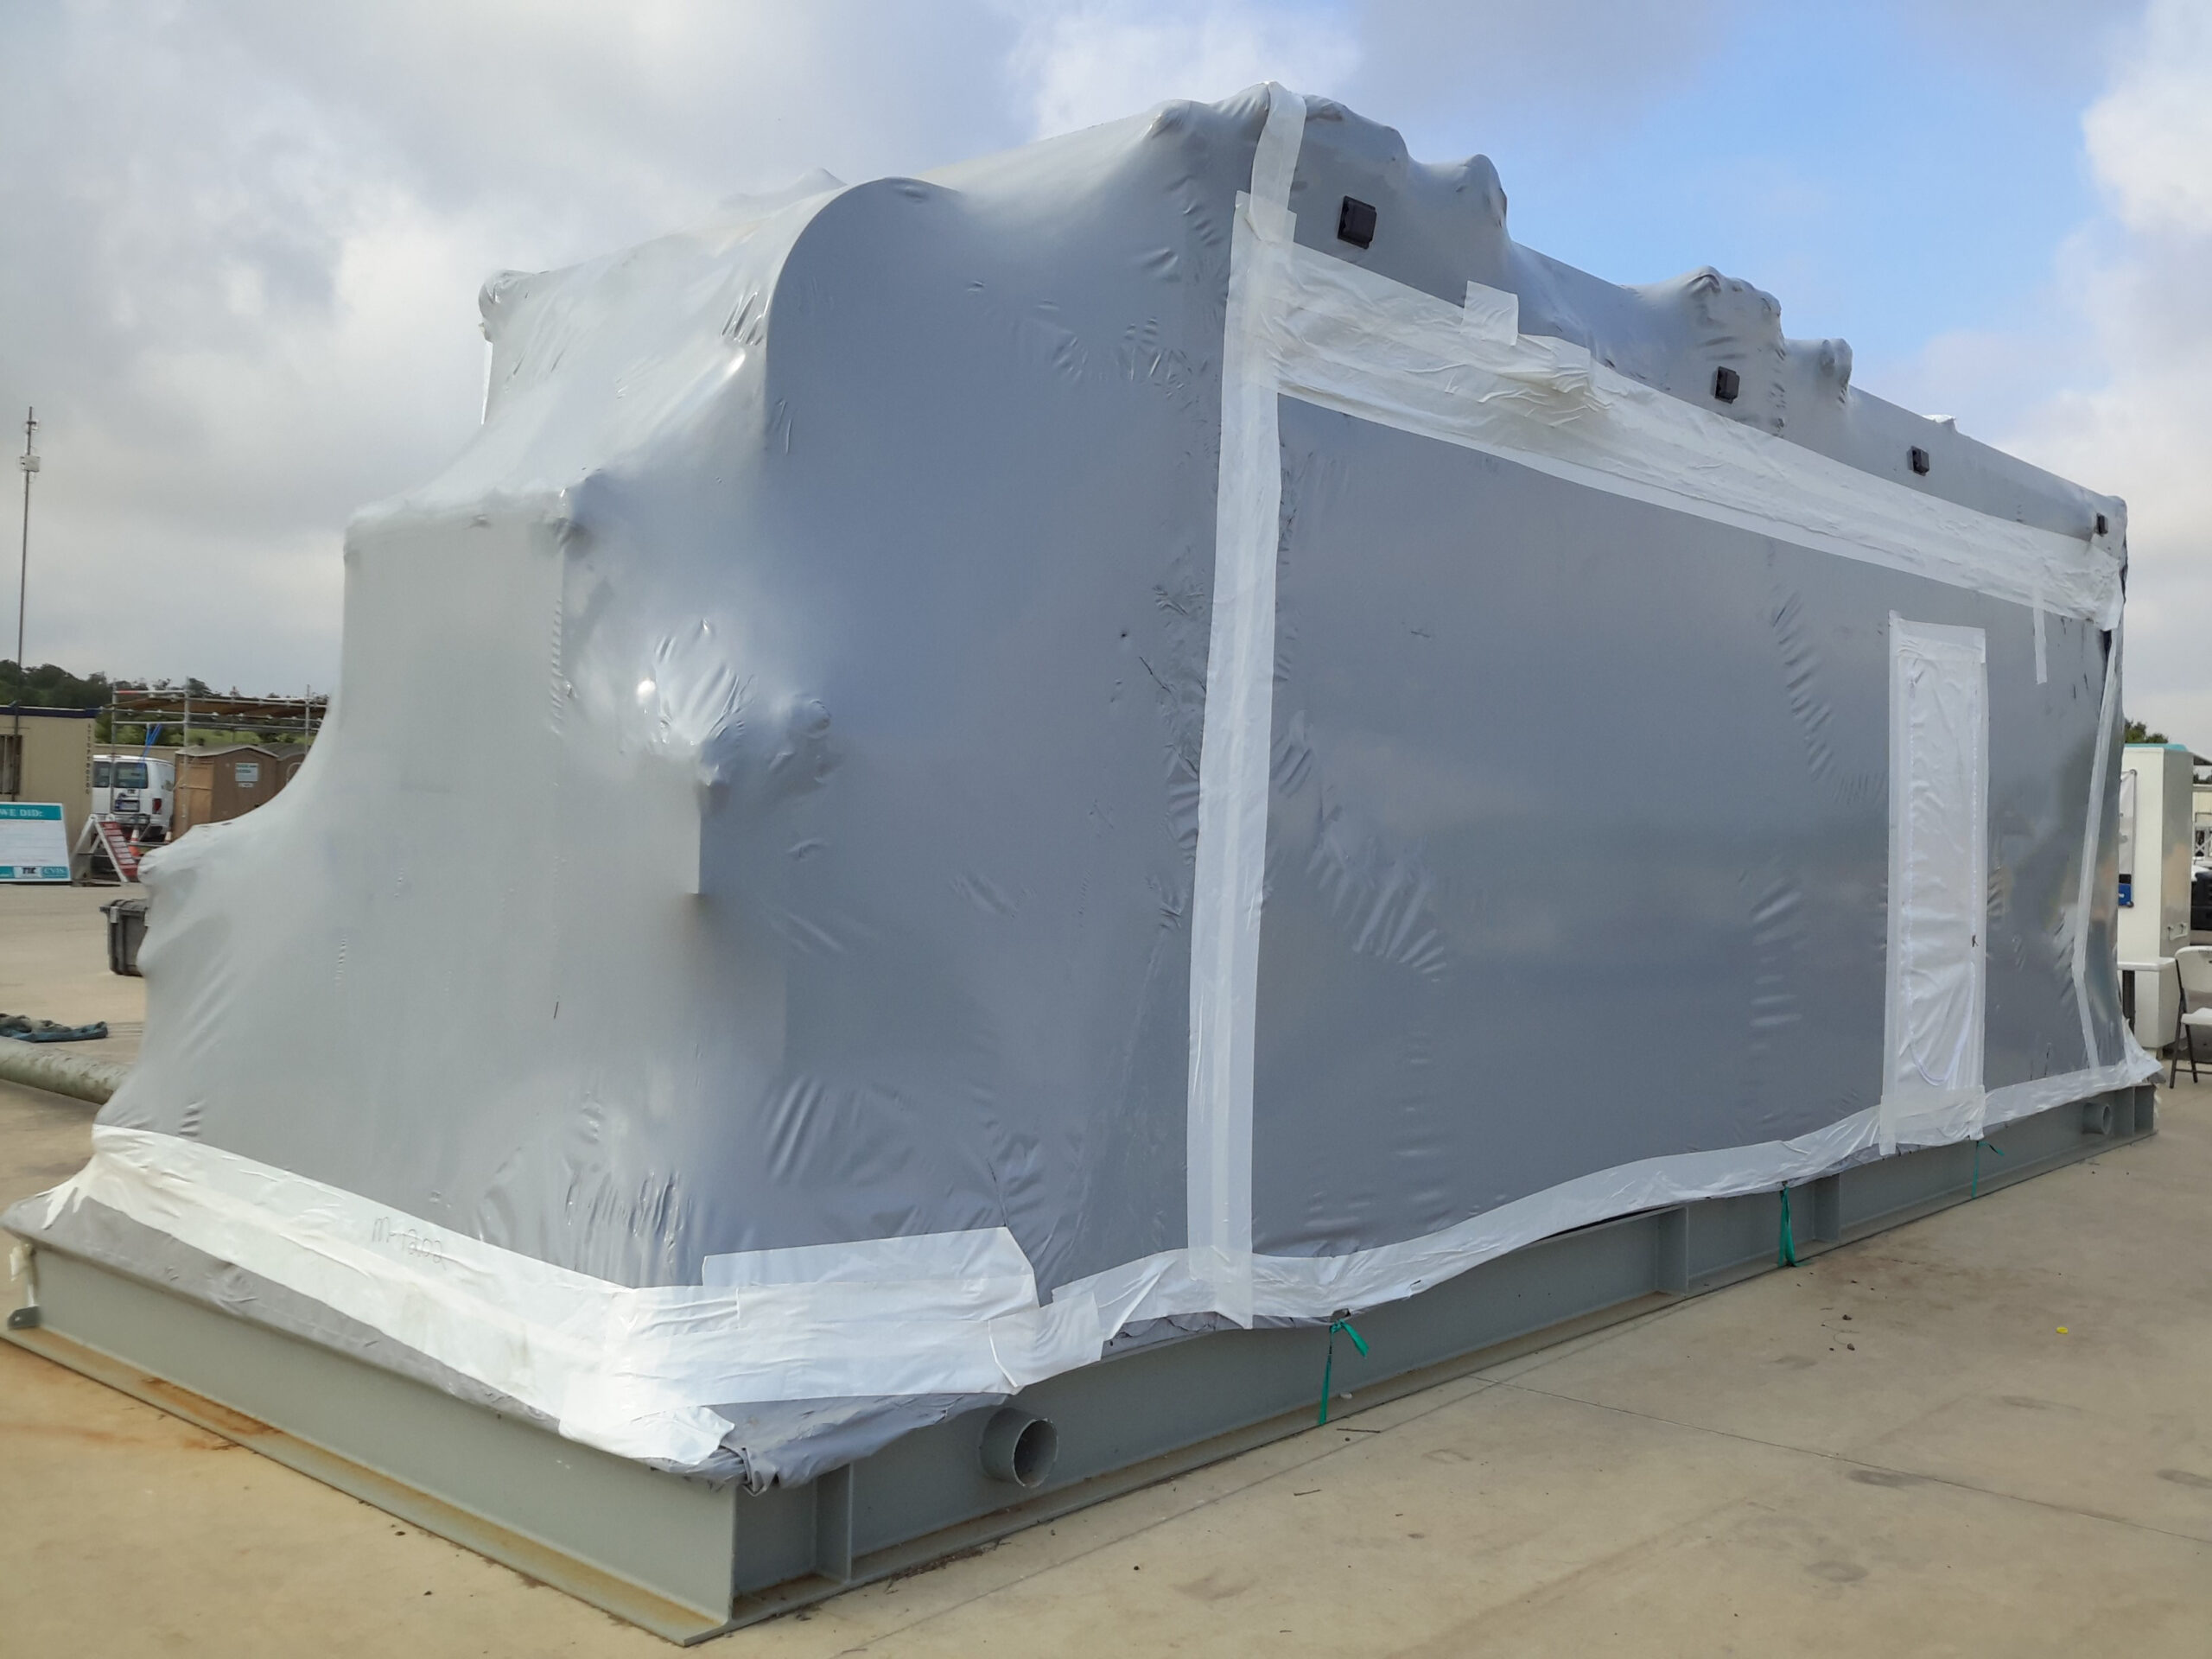 ZERUST® Provides Corrosion Protection During Outdoor Storage